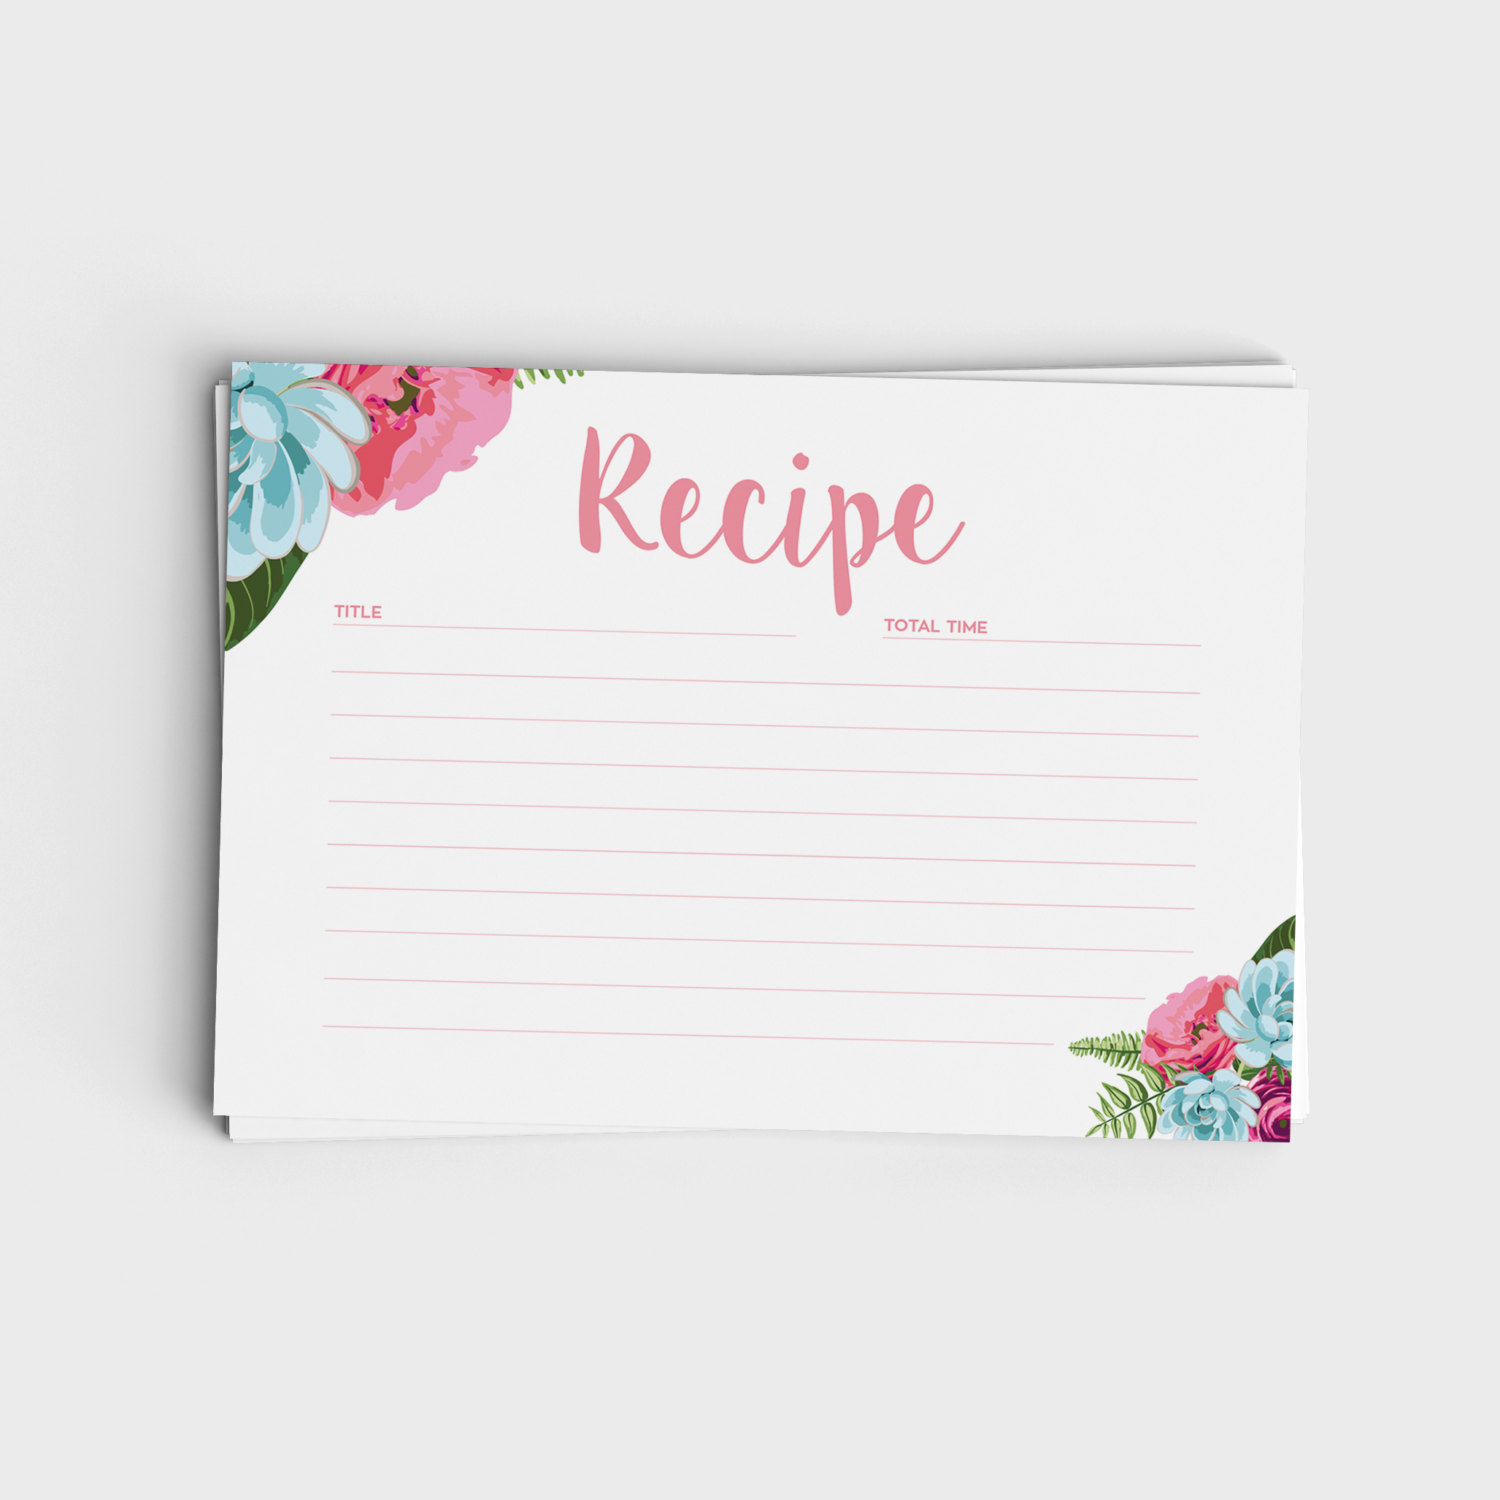 Recipe Card - Pink and Blue Floral Design